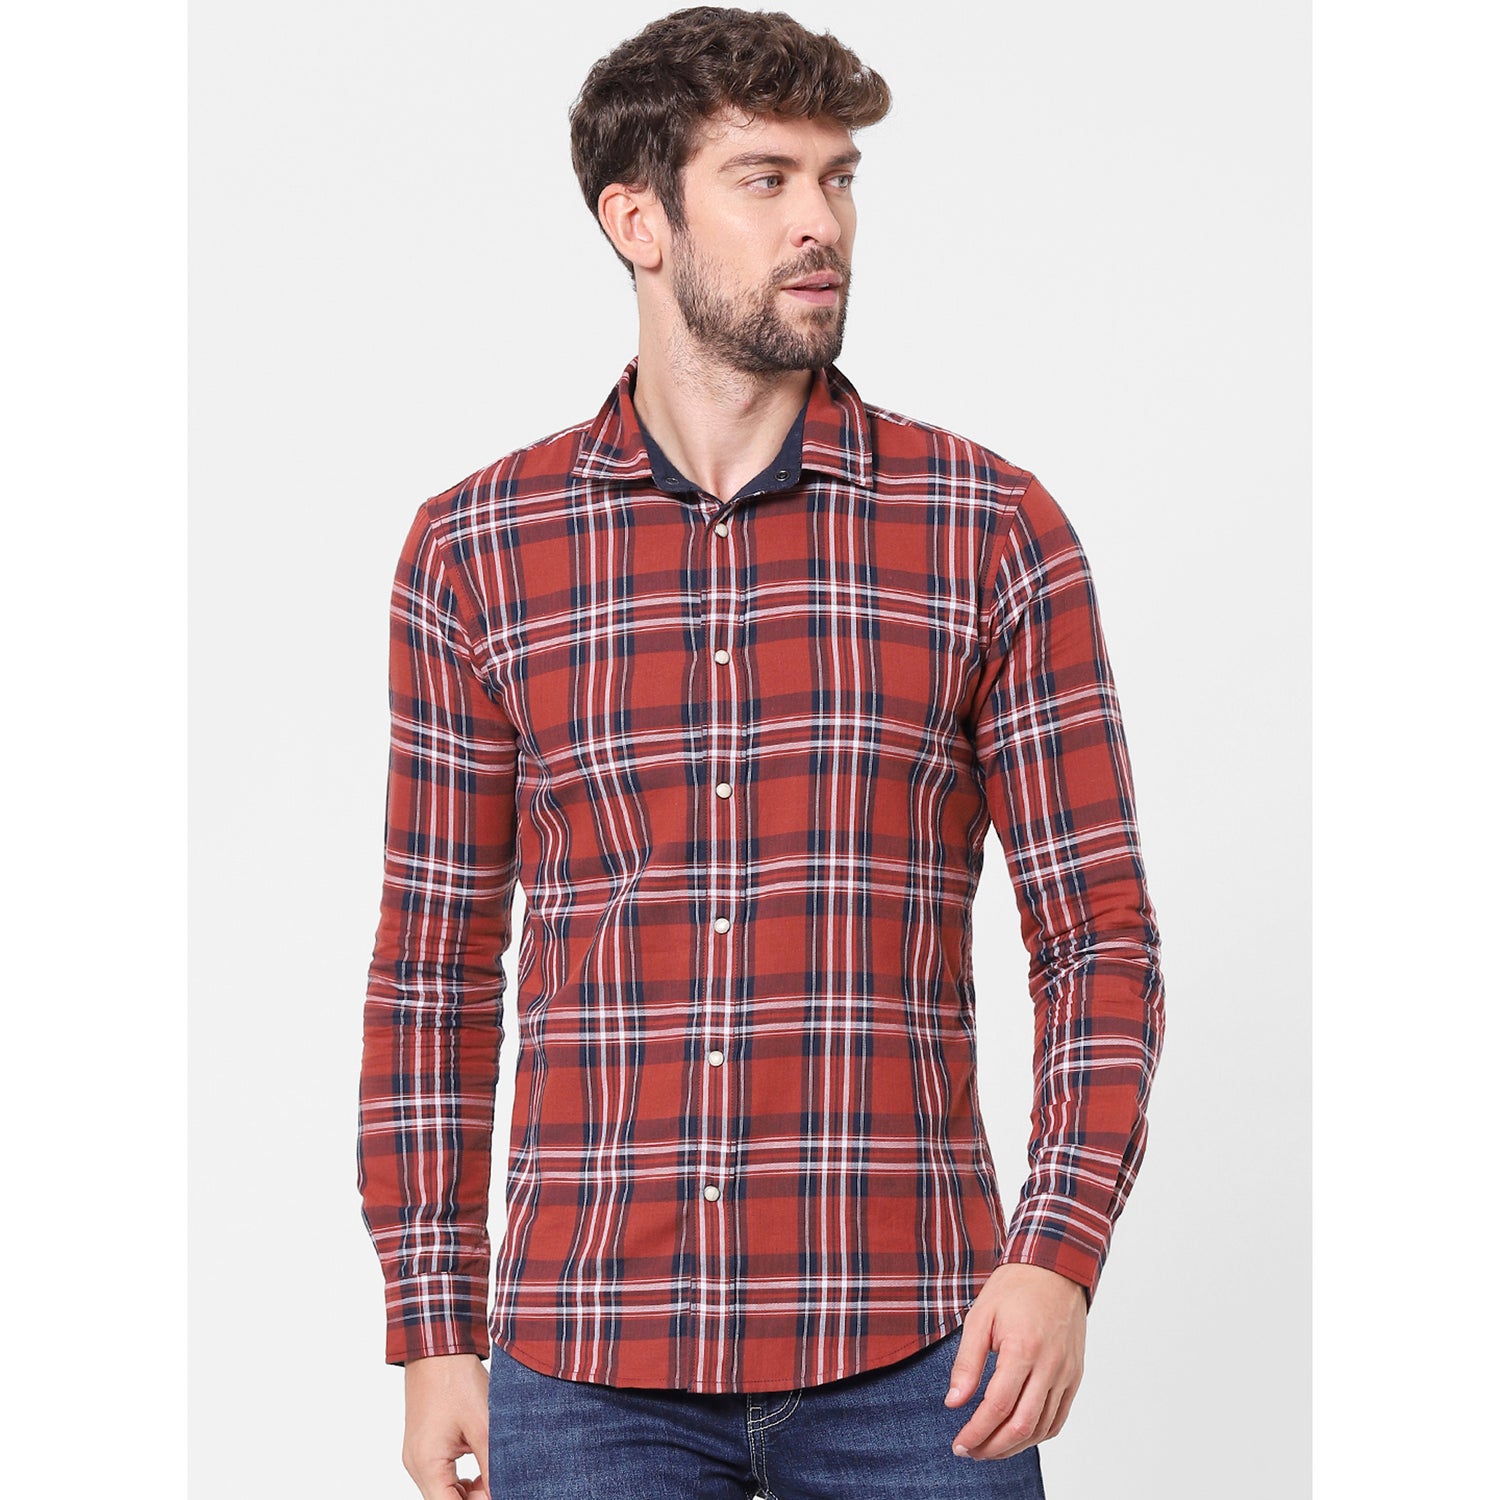 Red and Blue Tartan Checked Cotton Casual Shirt (VAREVERSE)